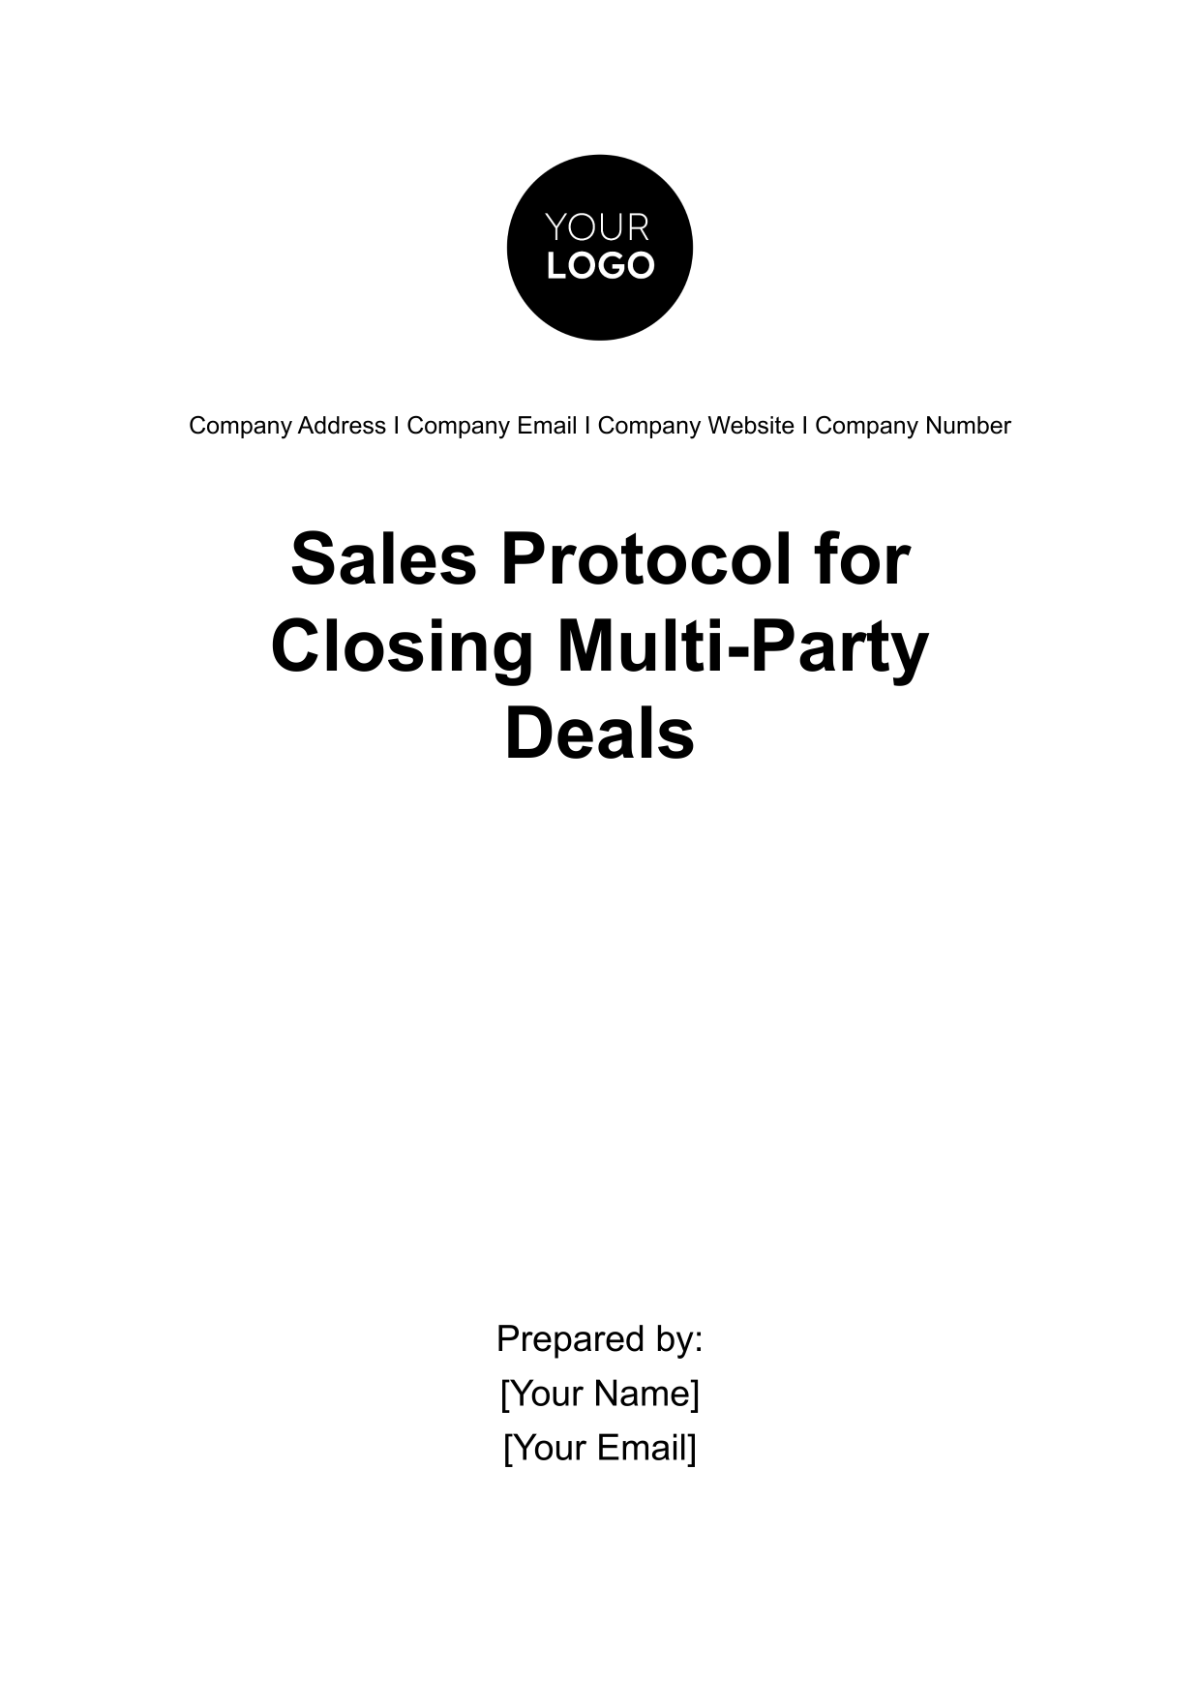 Free Sales Protocol for Closing Multi-Party Deals Template